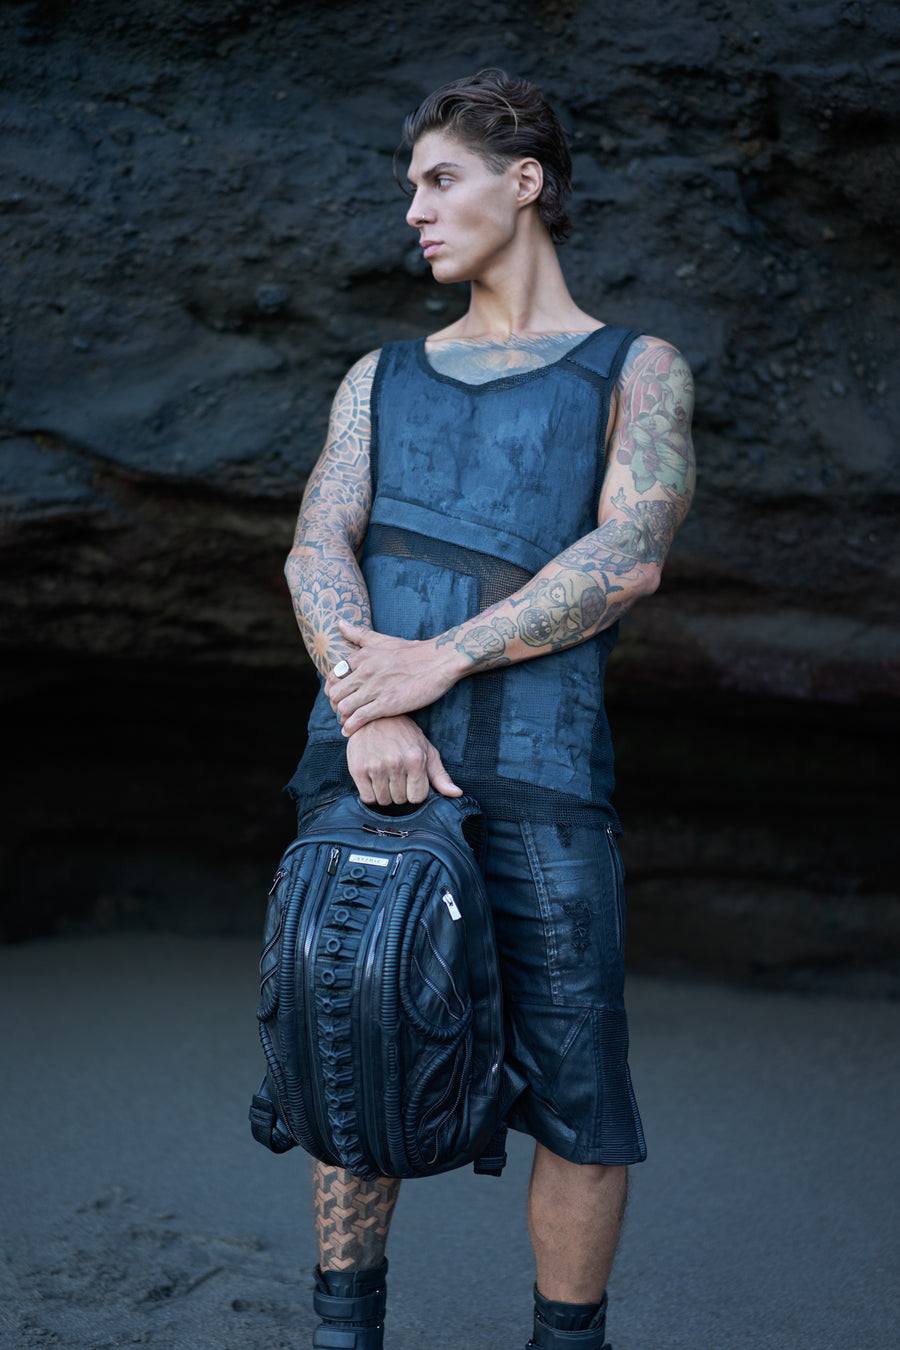 Men's avant-garde streetwear with dark post-apocalyptic clothing and leather backpack, alternative tank top and utility cargo shorts